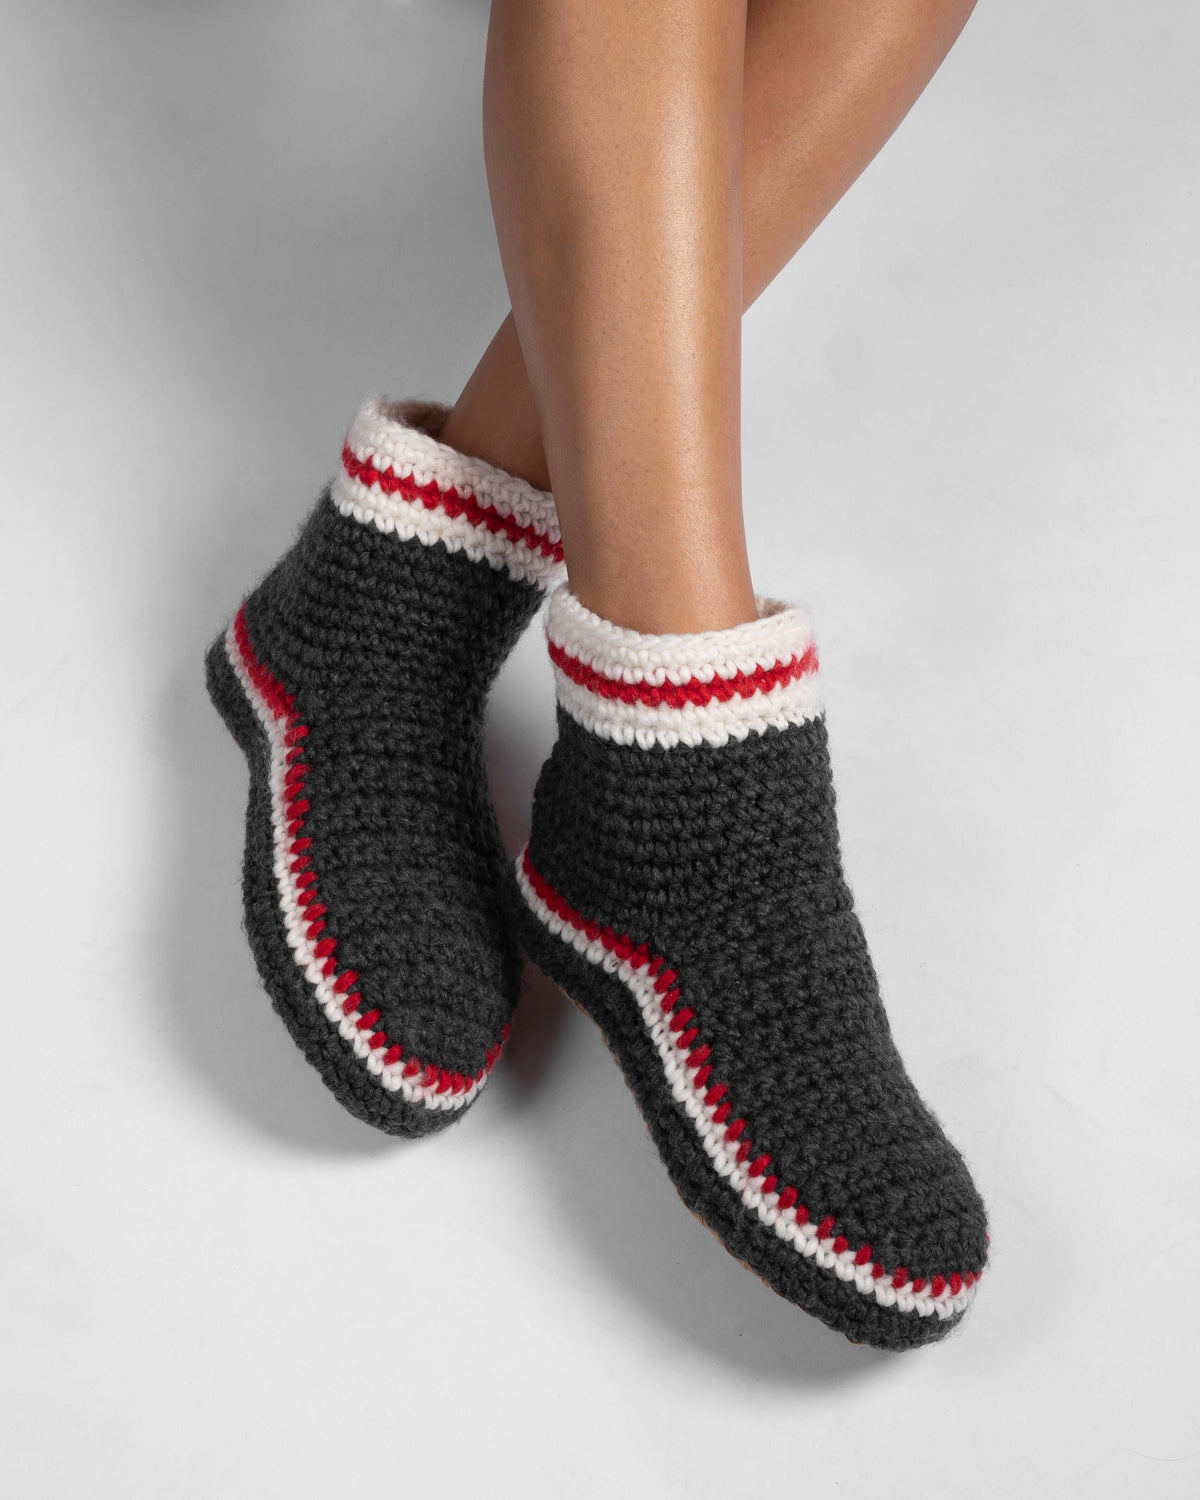 HAND-KNIT MOCCASIN BOOTIE - LATTELOVE Co.